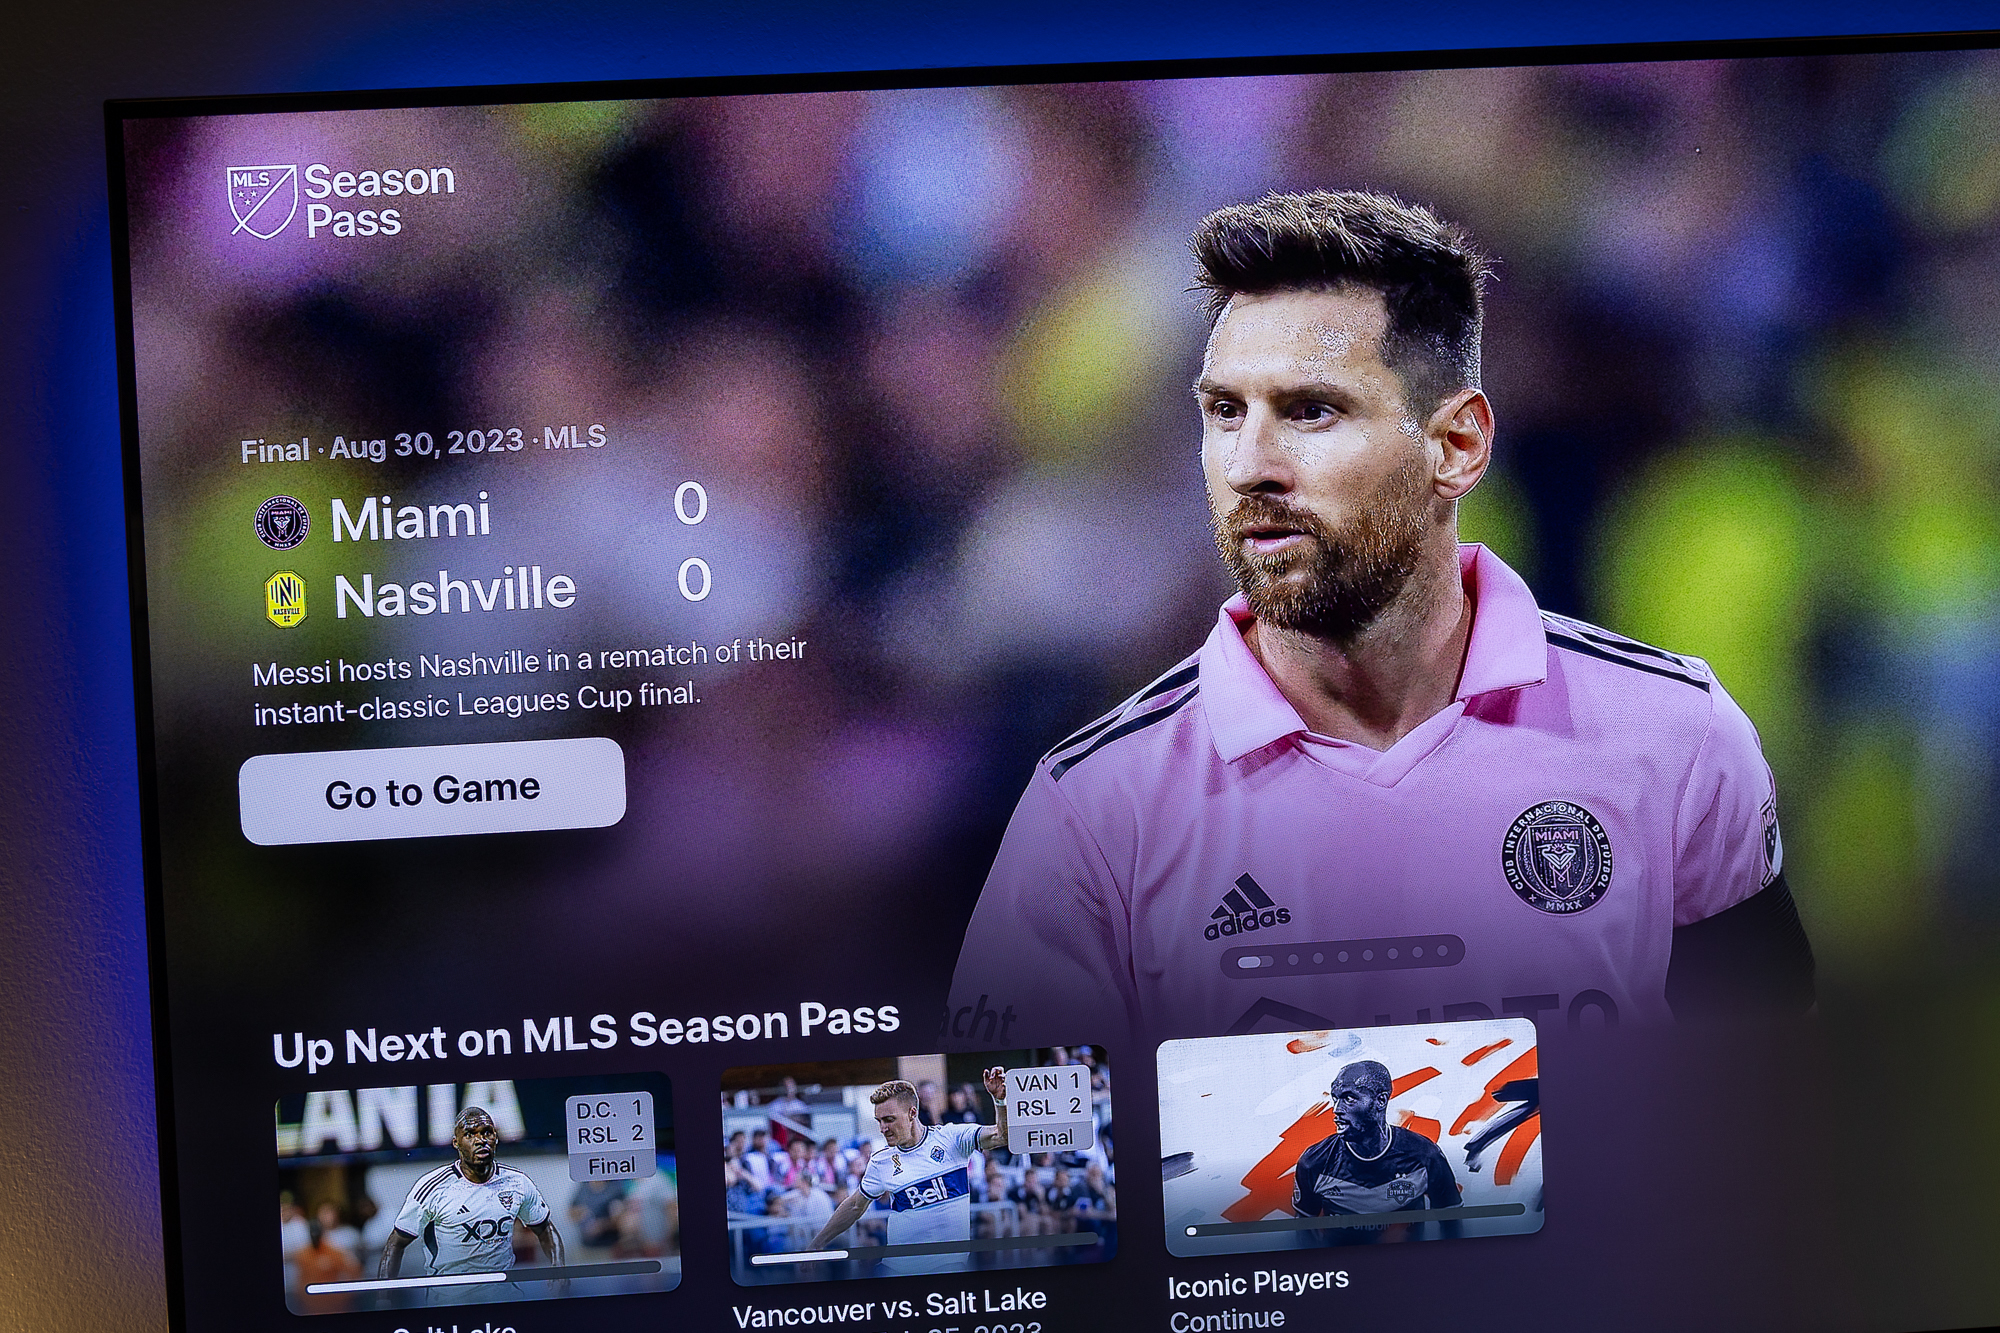 How to watch Apple TV+, MLS Season Pass, and more - Apple Support